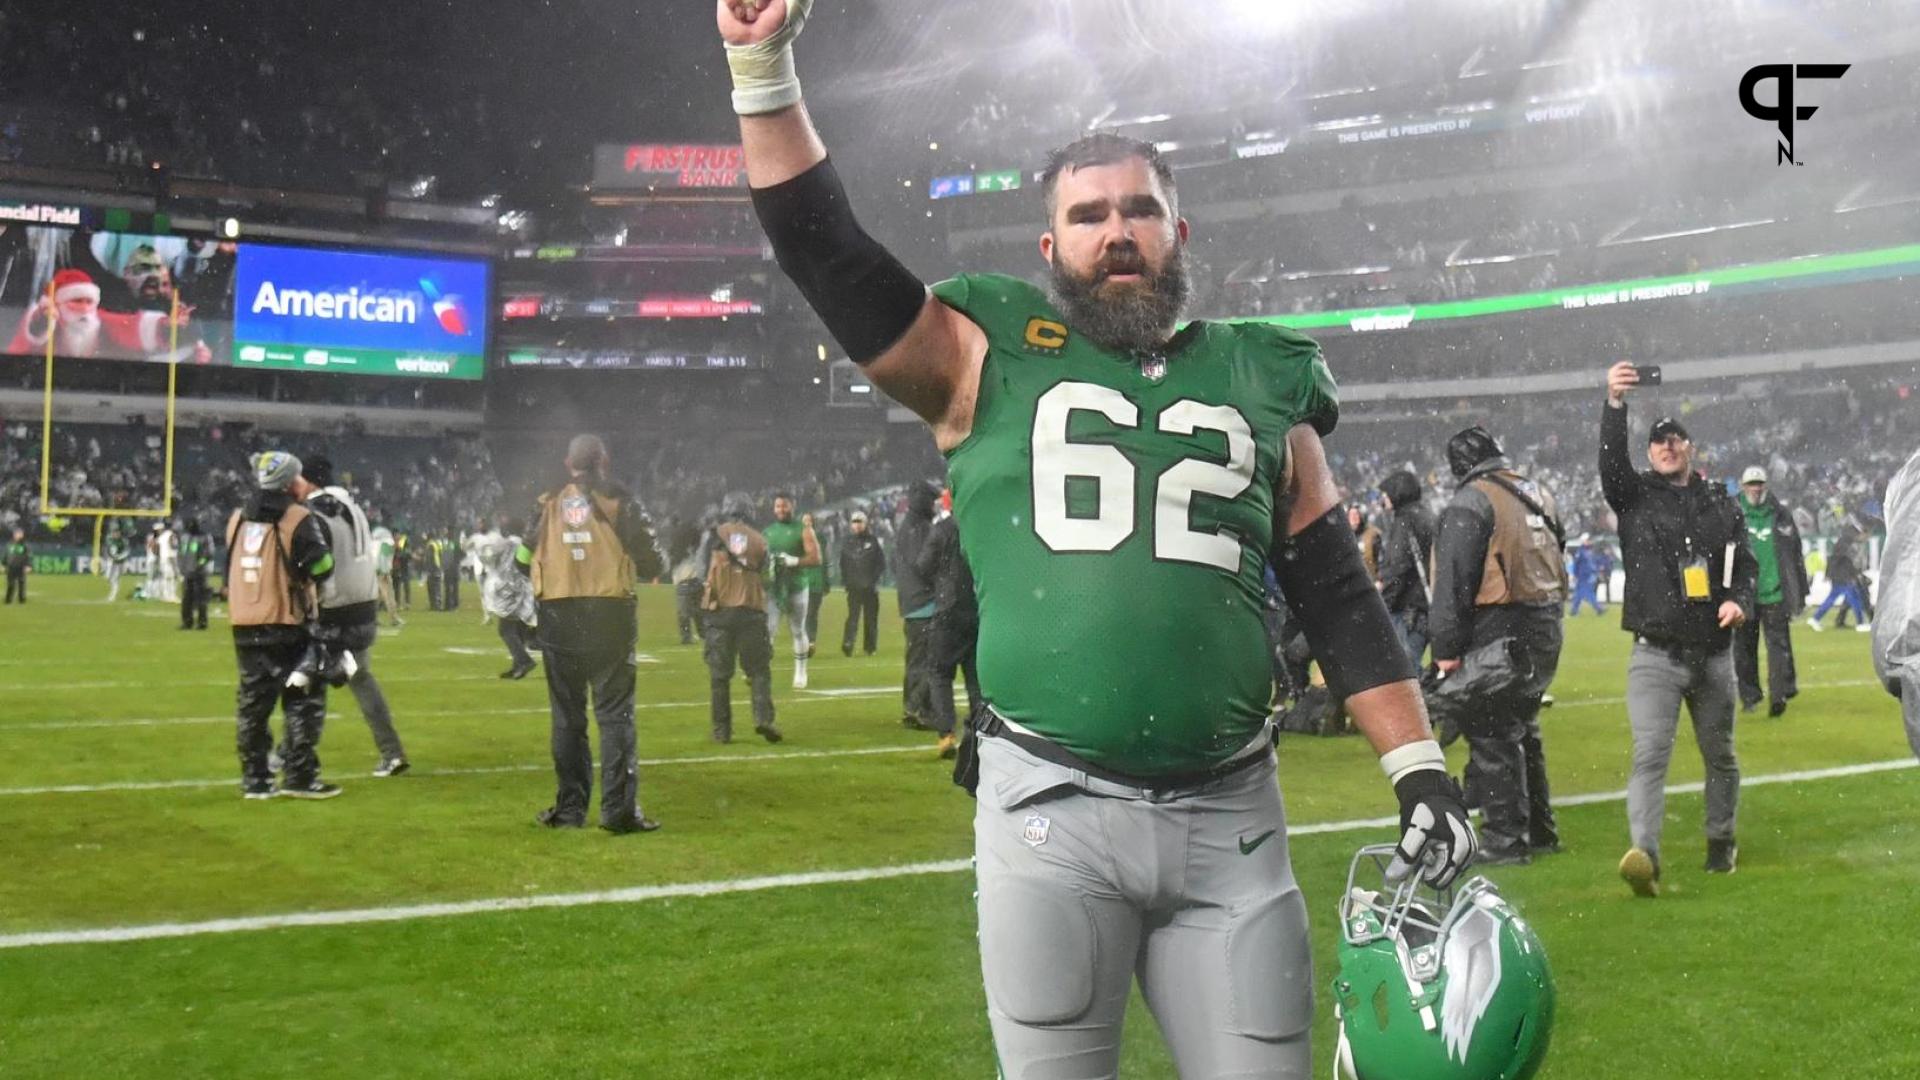 Philadelphia Eagles center Jason Kelce (62) walks off the field after overtime win against the Buffalo Bills at Lincoln Financial Field.